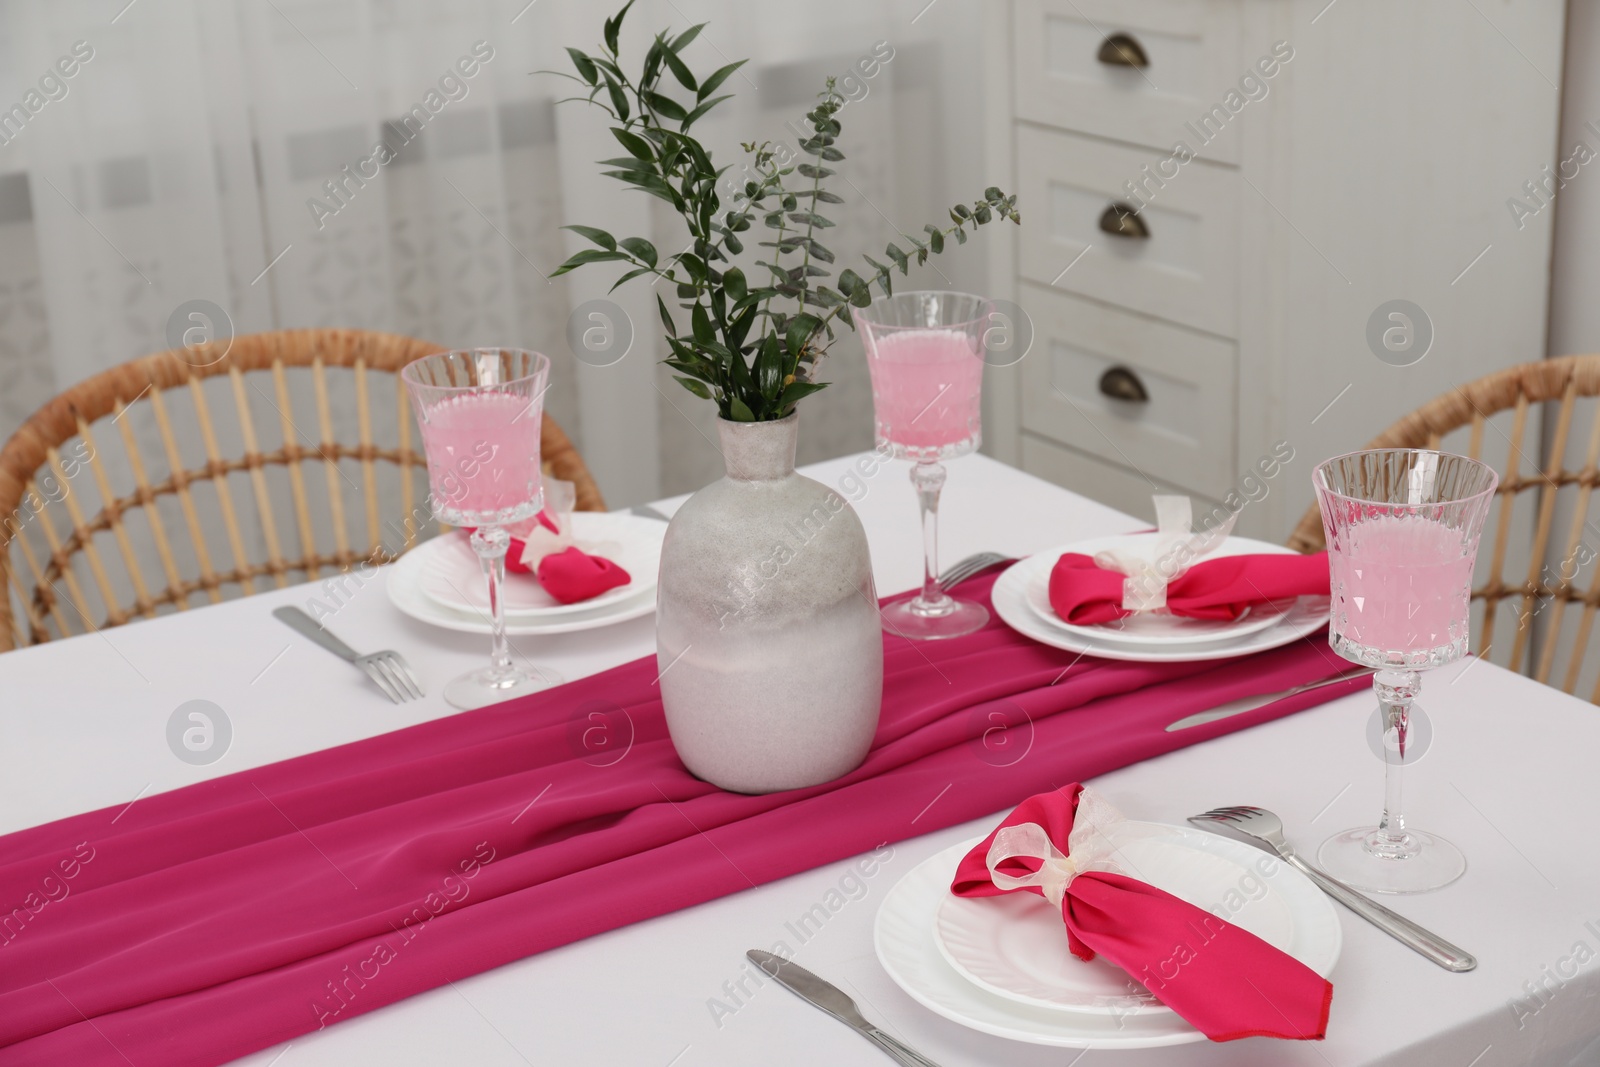 Photo of Table setting. Glasses of tasty beverage, plates, pink napkins and vase with green branches in dining room